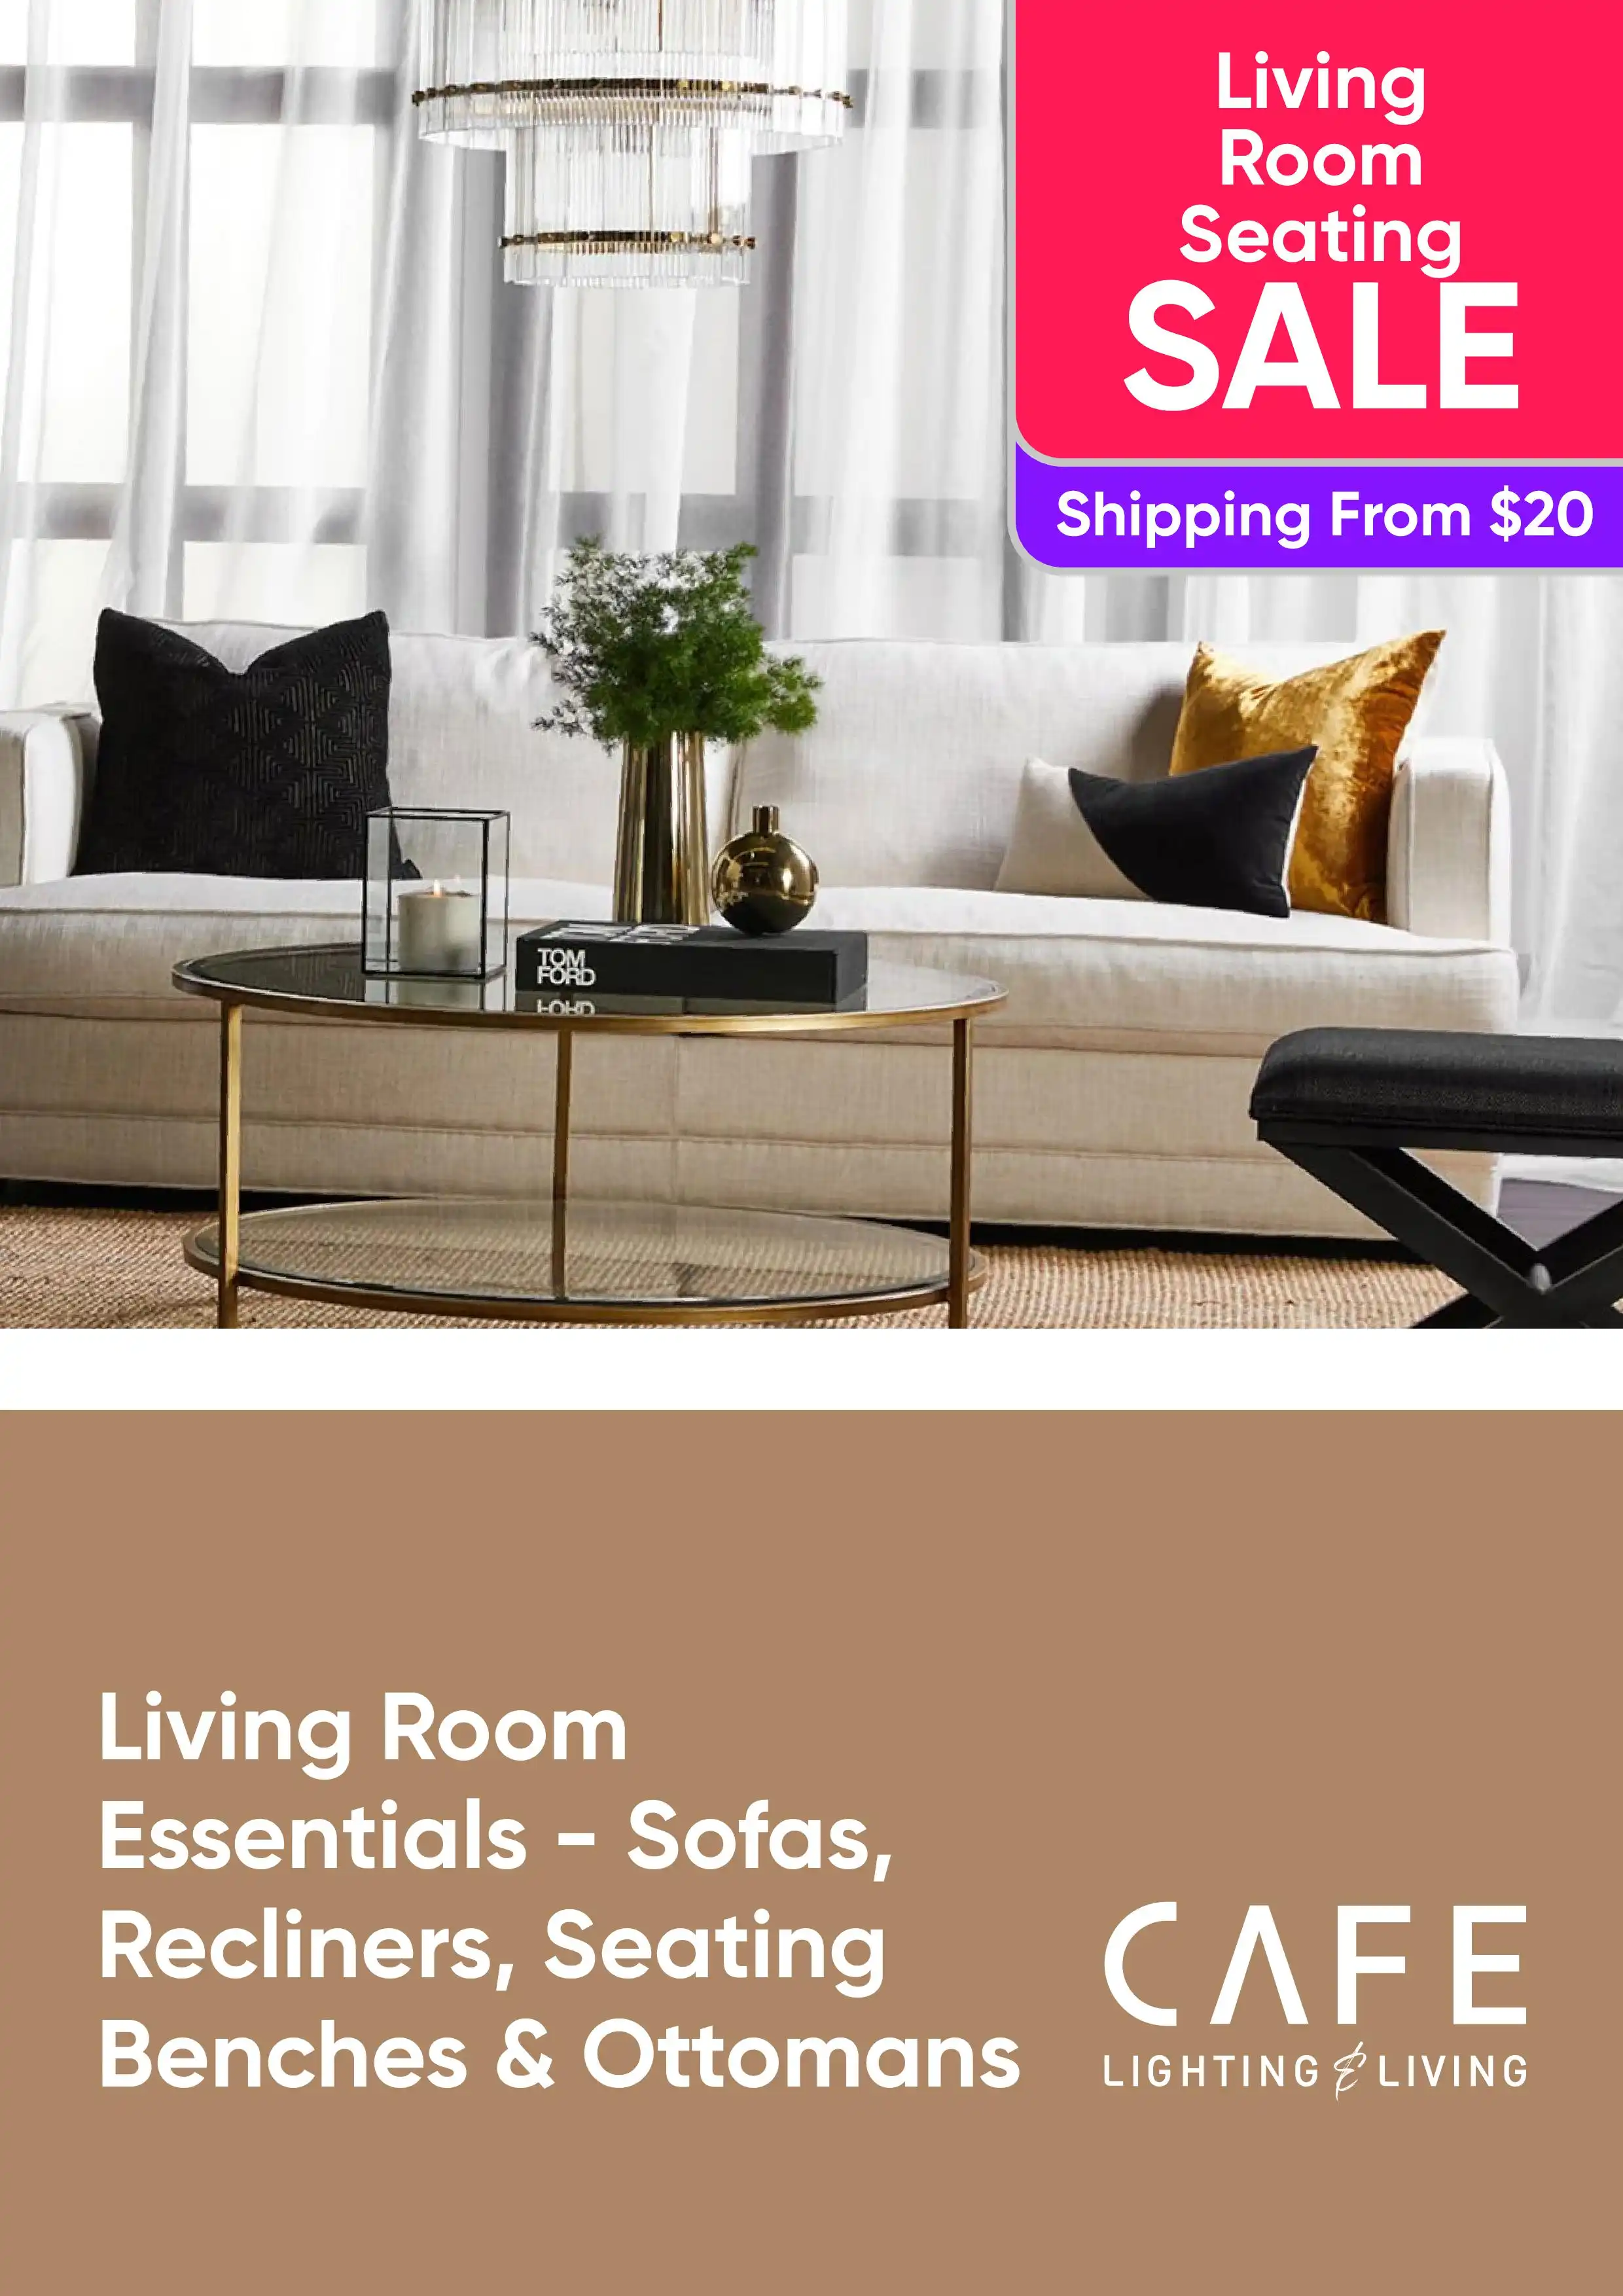 Living Room Essentials - Sofas, Recliners, Seating Benches and Ottomans